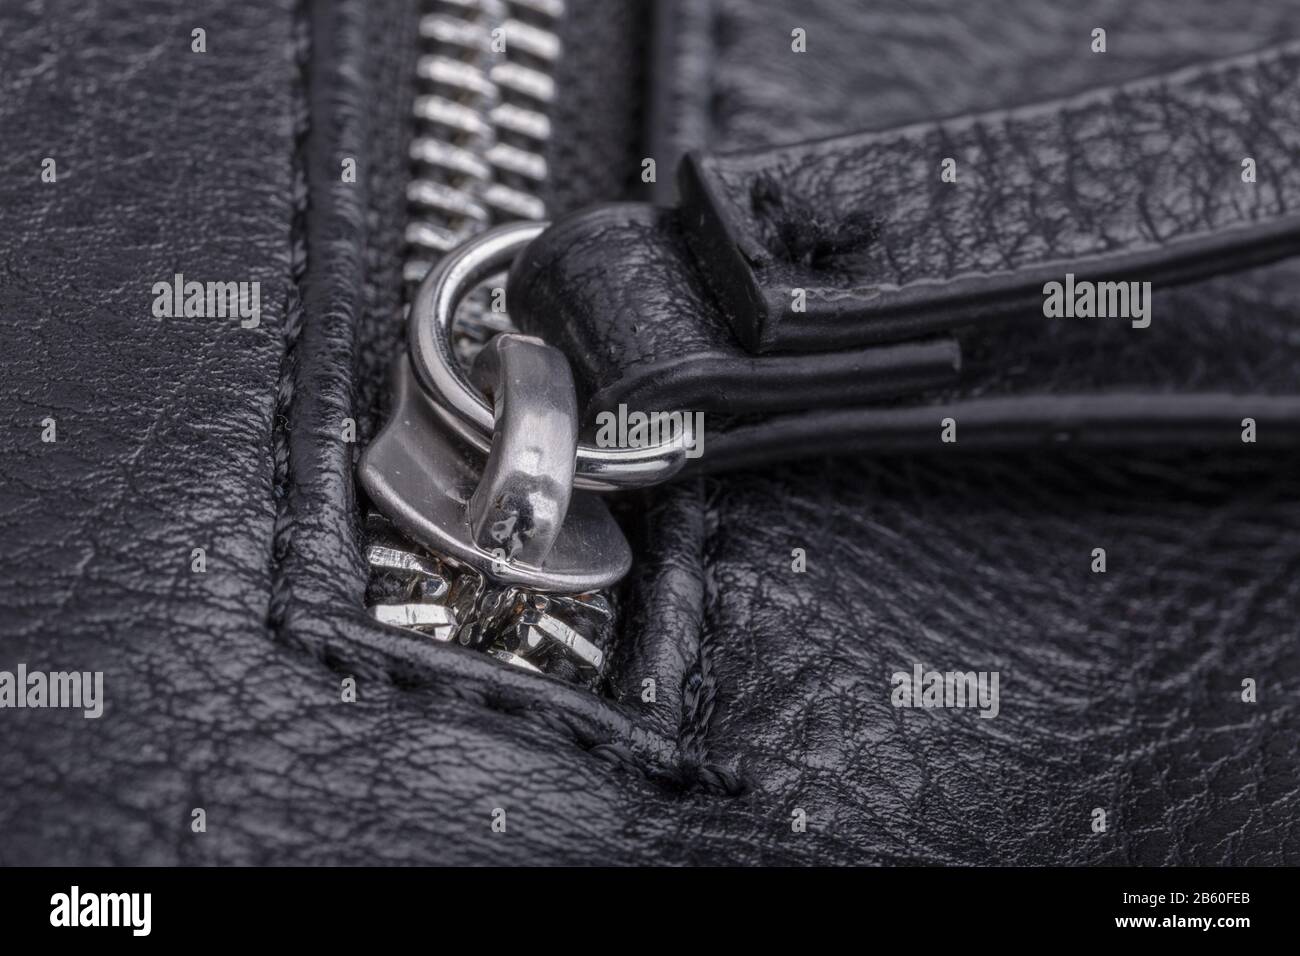 Lock the zipper from the leather bag. Close up Stock Photo